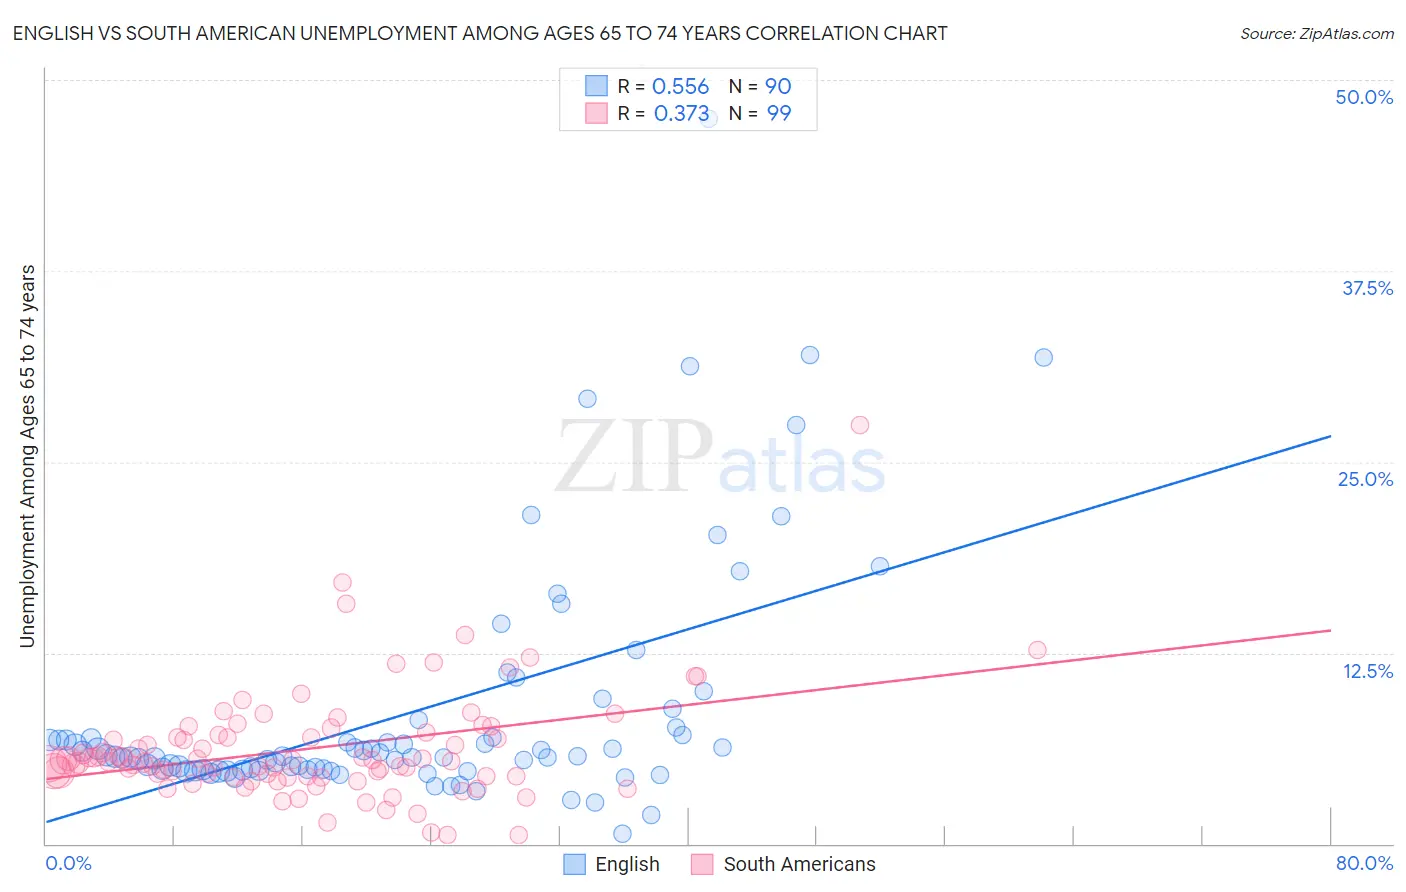 English vs South American Unemployment Among Ages 65 to 74 years